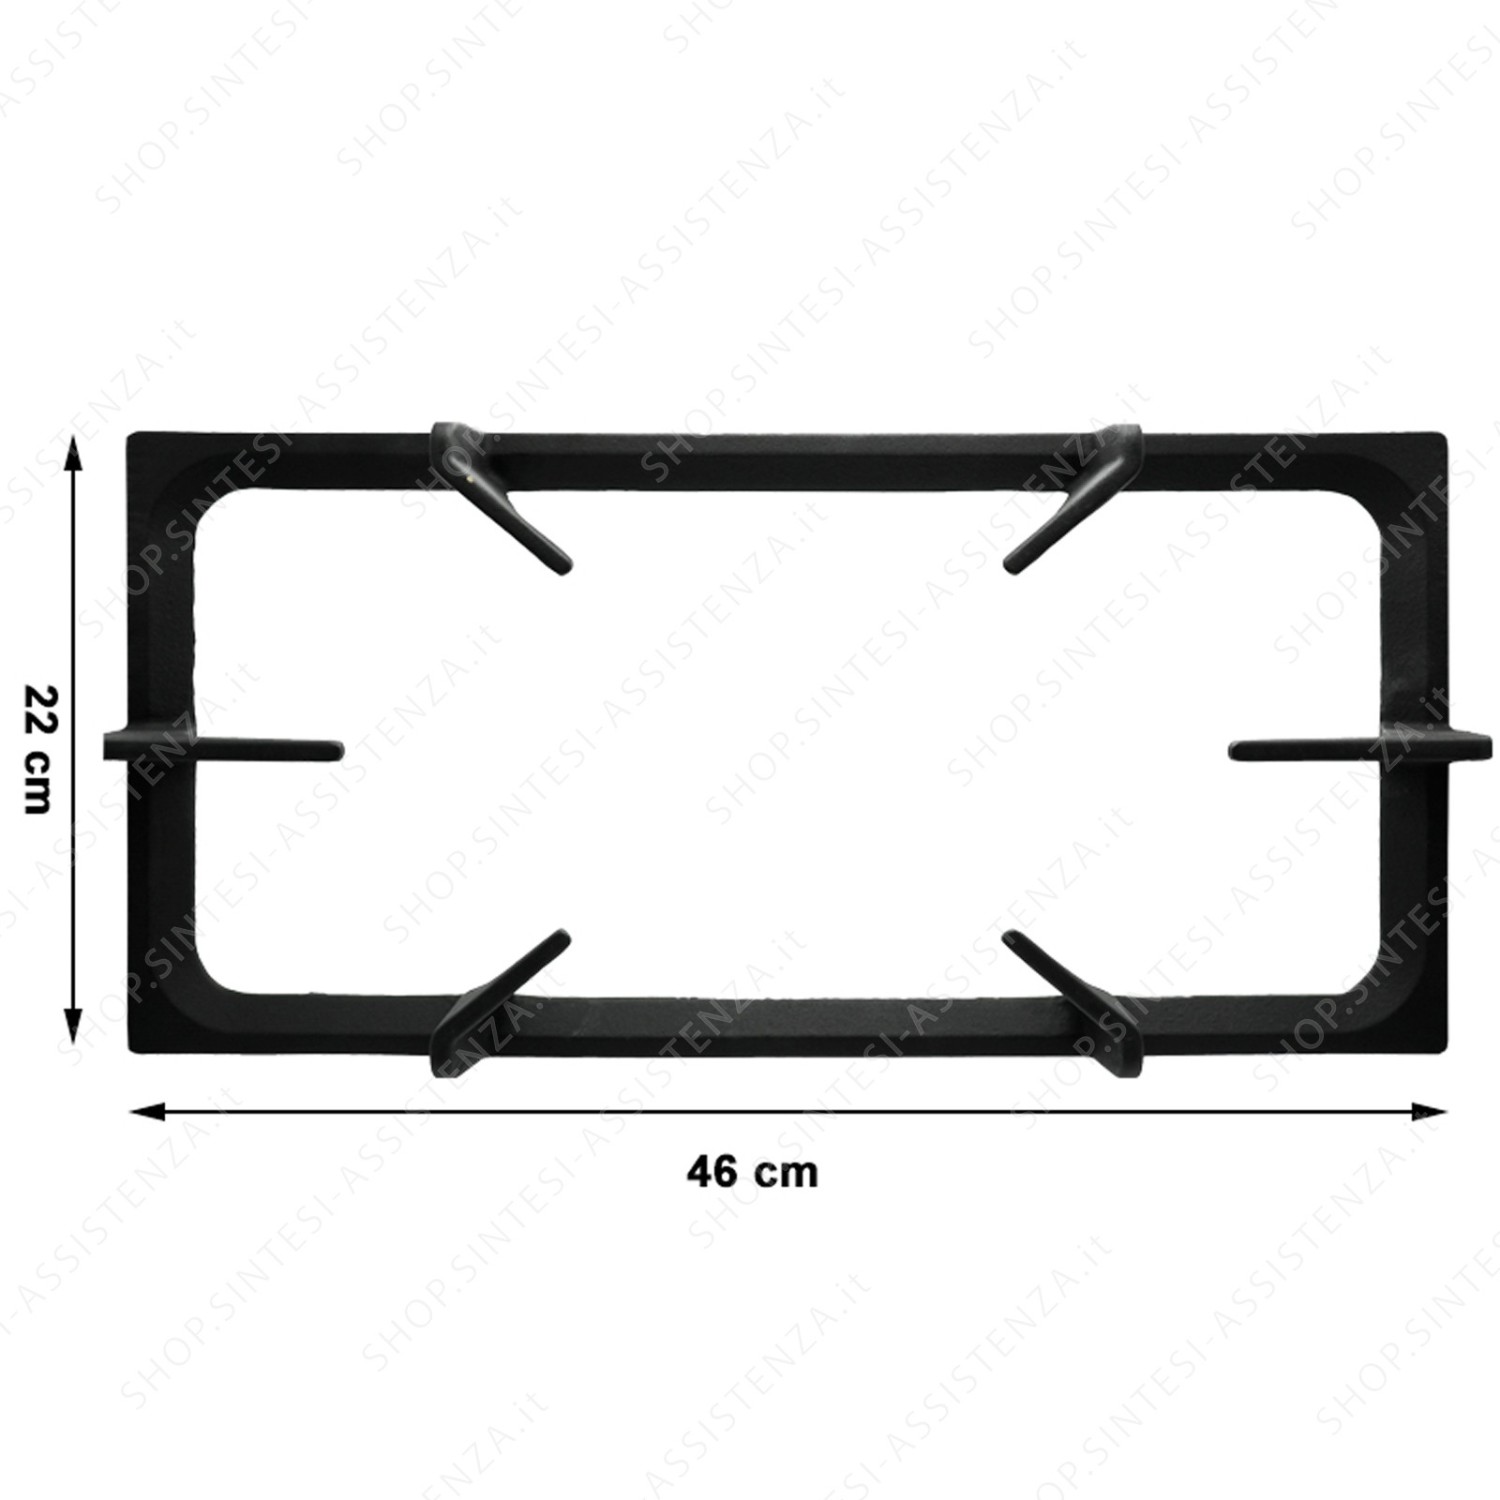 CAST IRON GRILL 1 CENTRAL BURN FOR FOSTER HOB 9601633 - 9601633